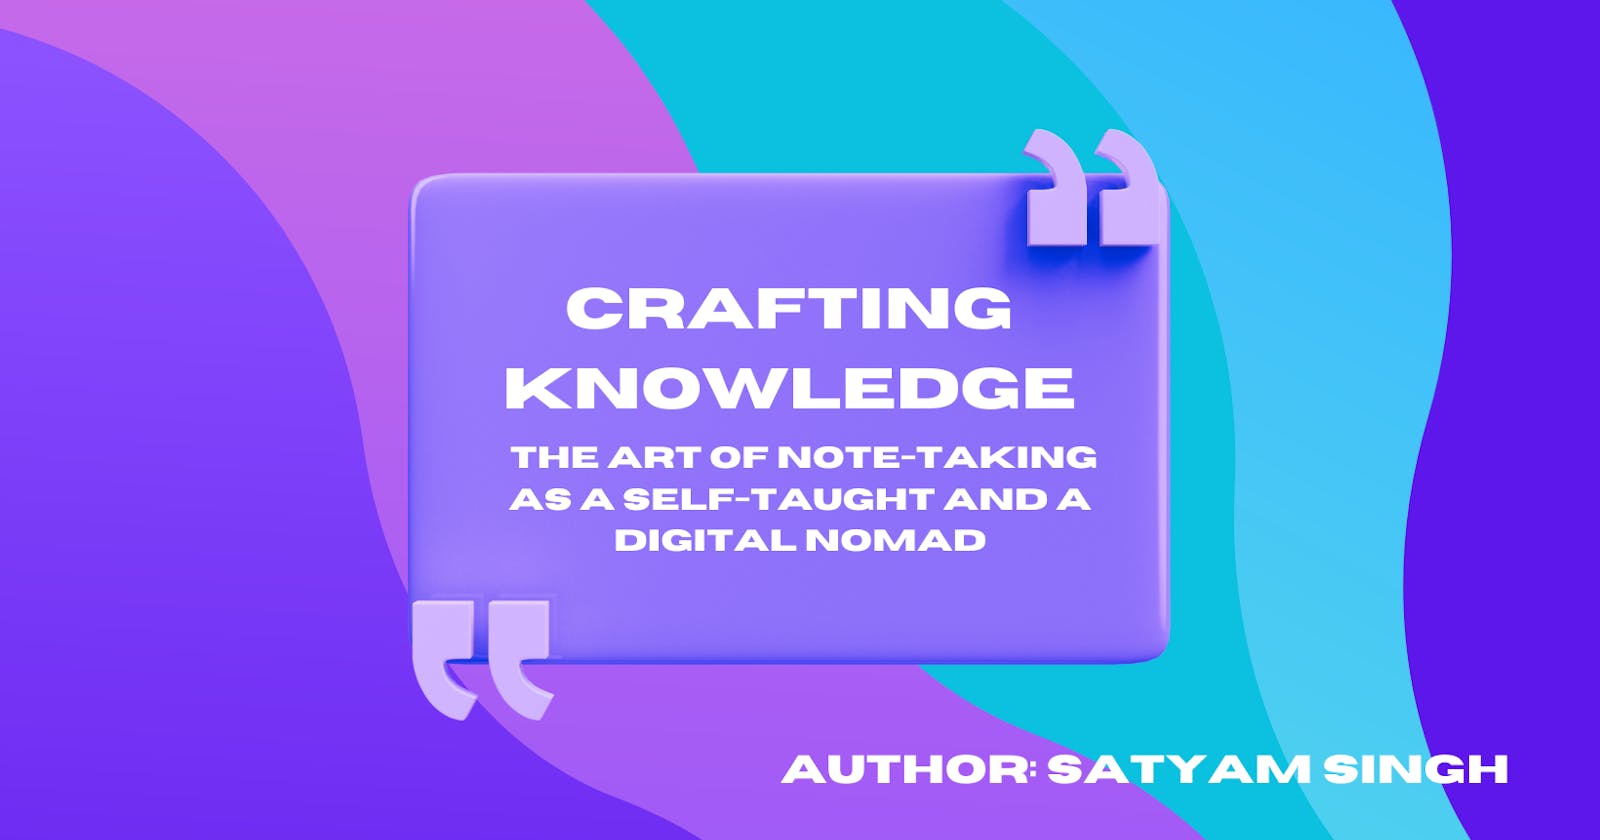 Crafting Knowledge - The Art of Note-Taking as a Self-Taught and a Digital Nomad